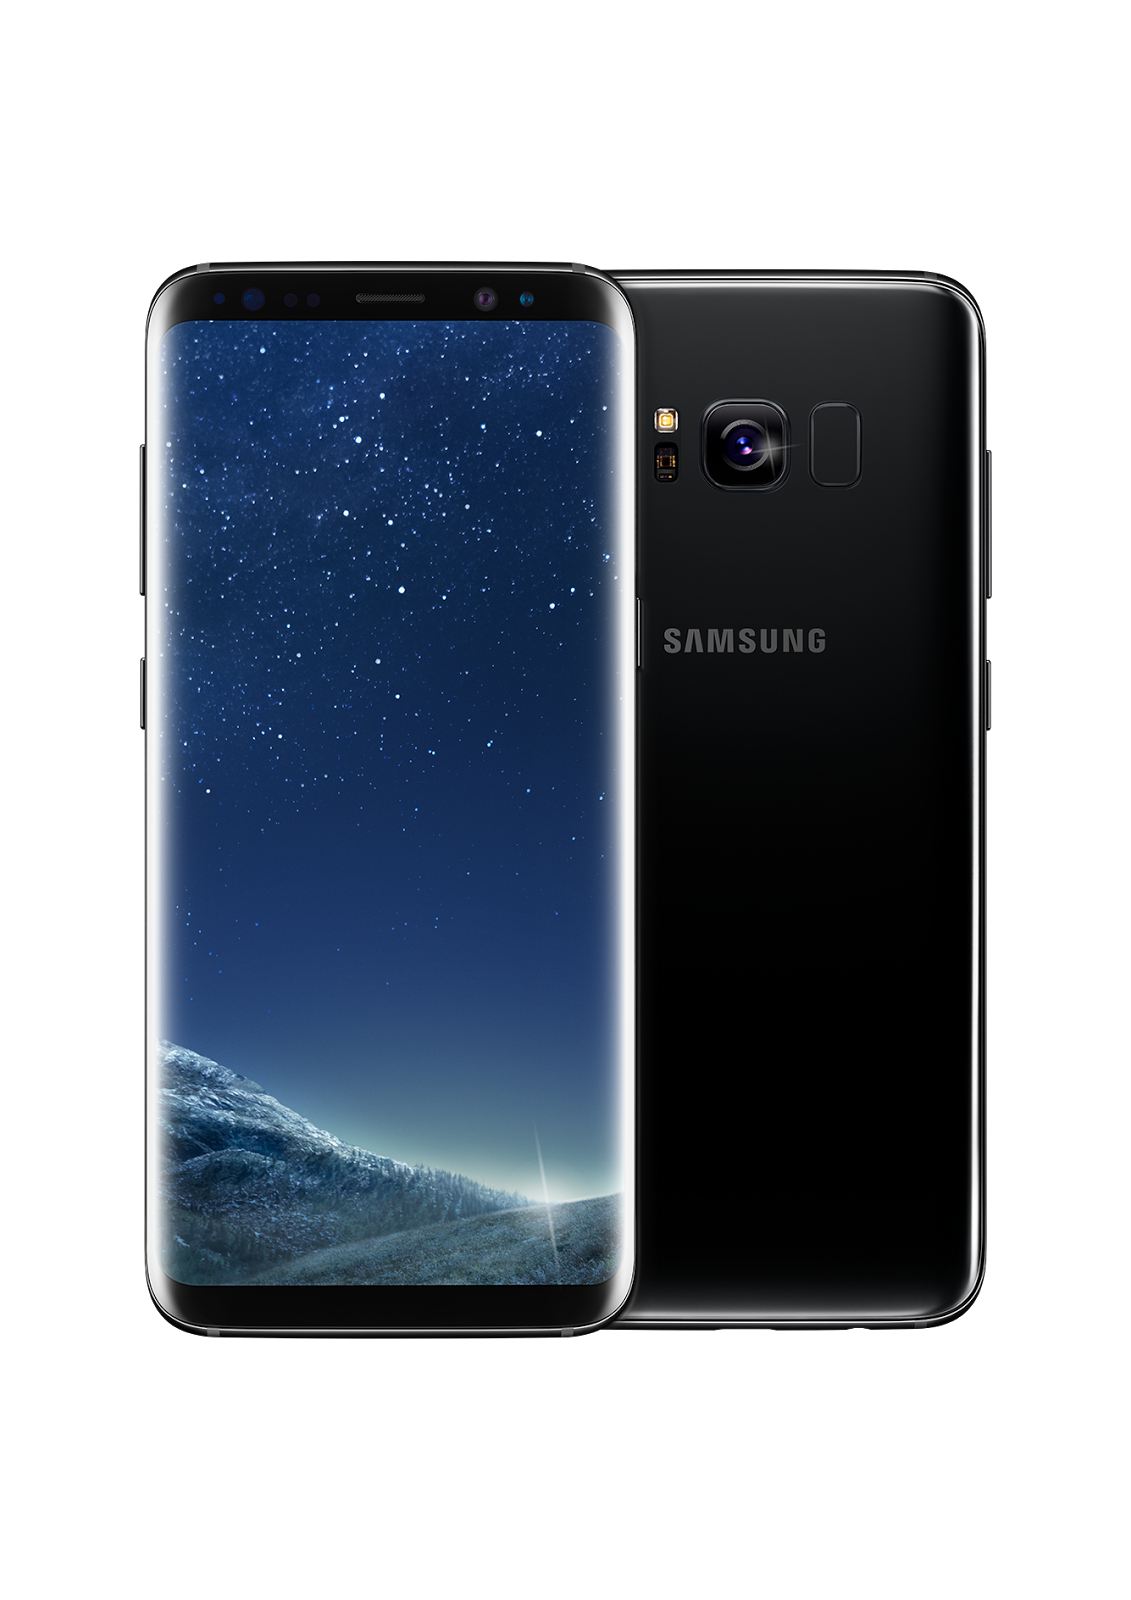 Pre-order Samsung Galaxy S8 and S8+ in Malaysia ...